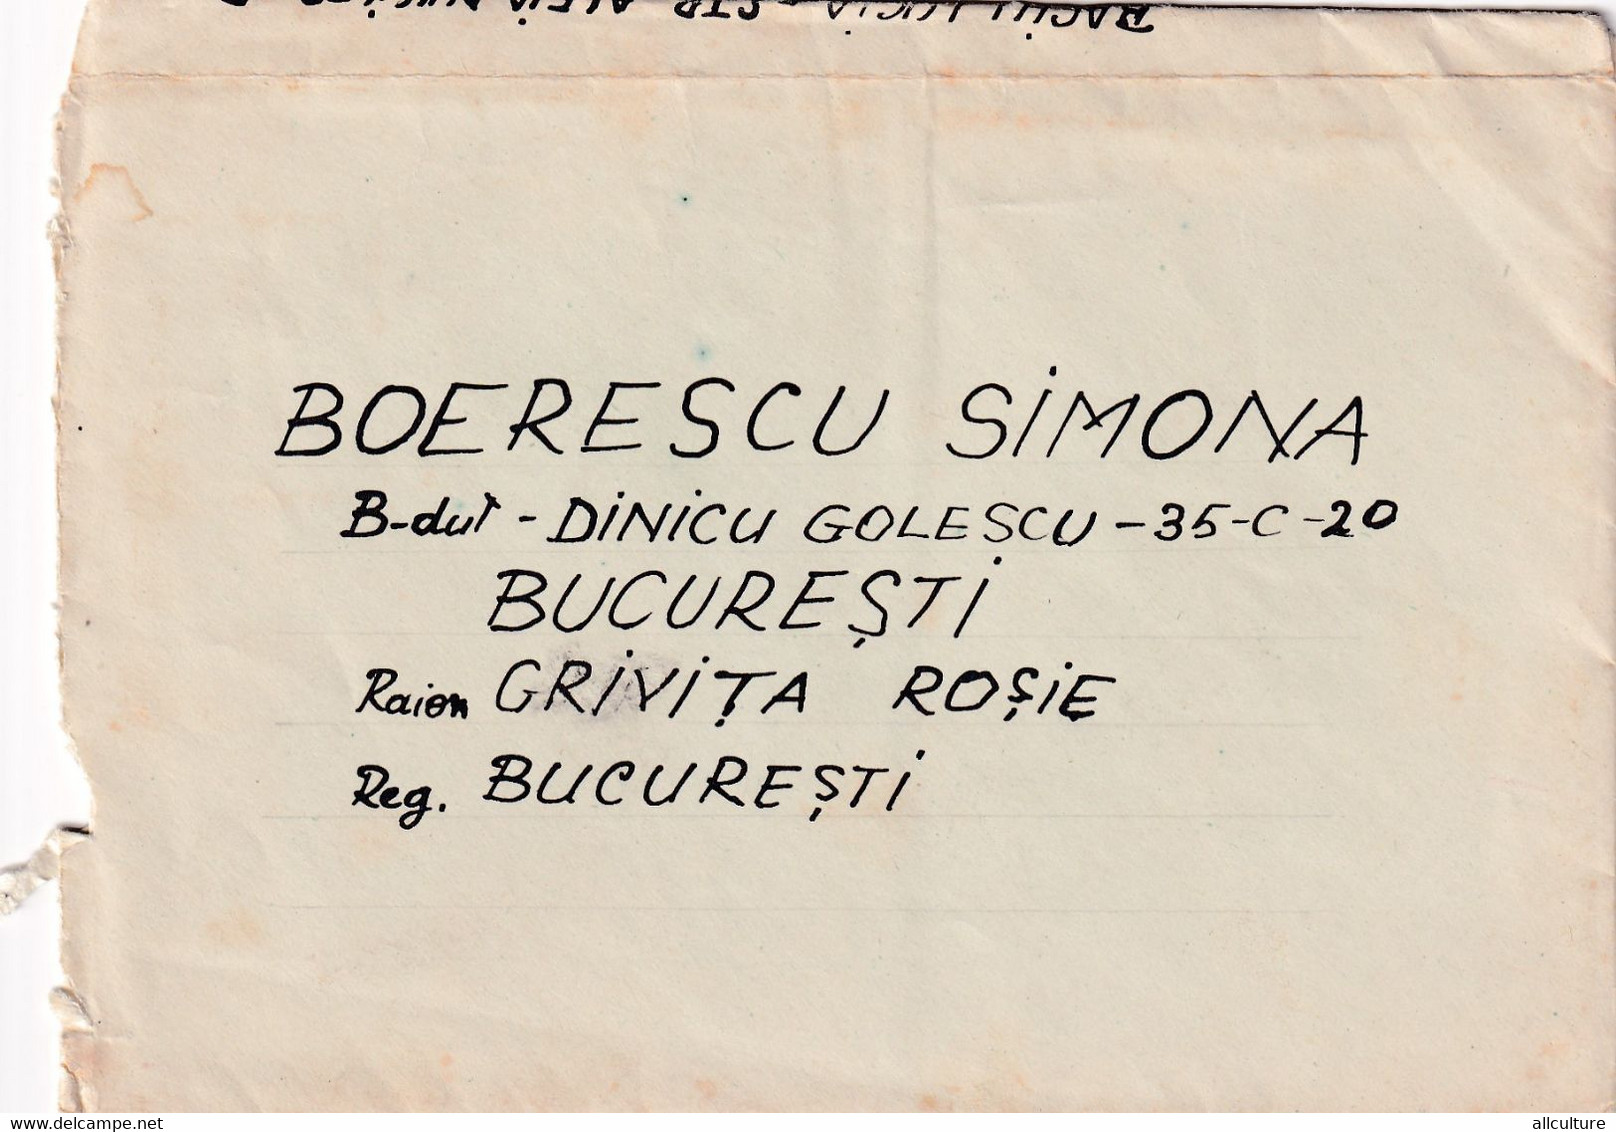 A8489- LETTER FROM BUCHAREST TO PLOIESTI ROMANIA 1965 - Covers & Documents